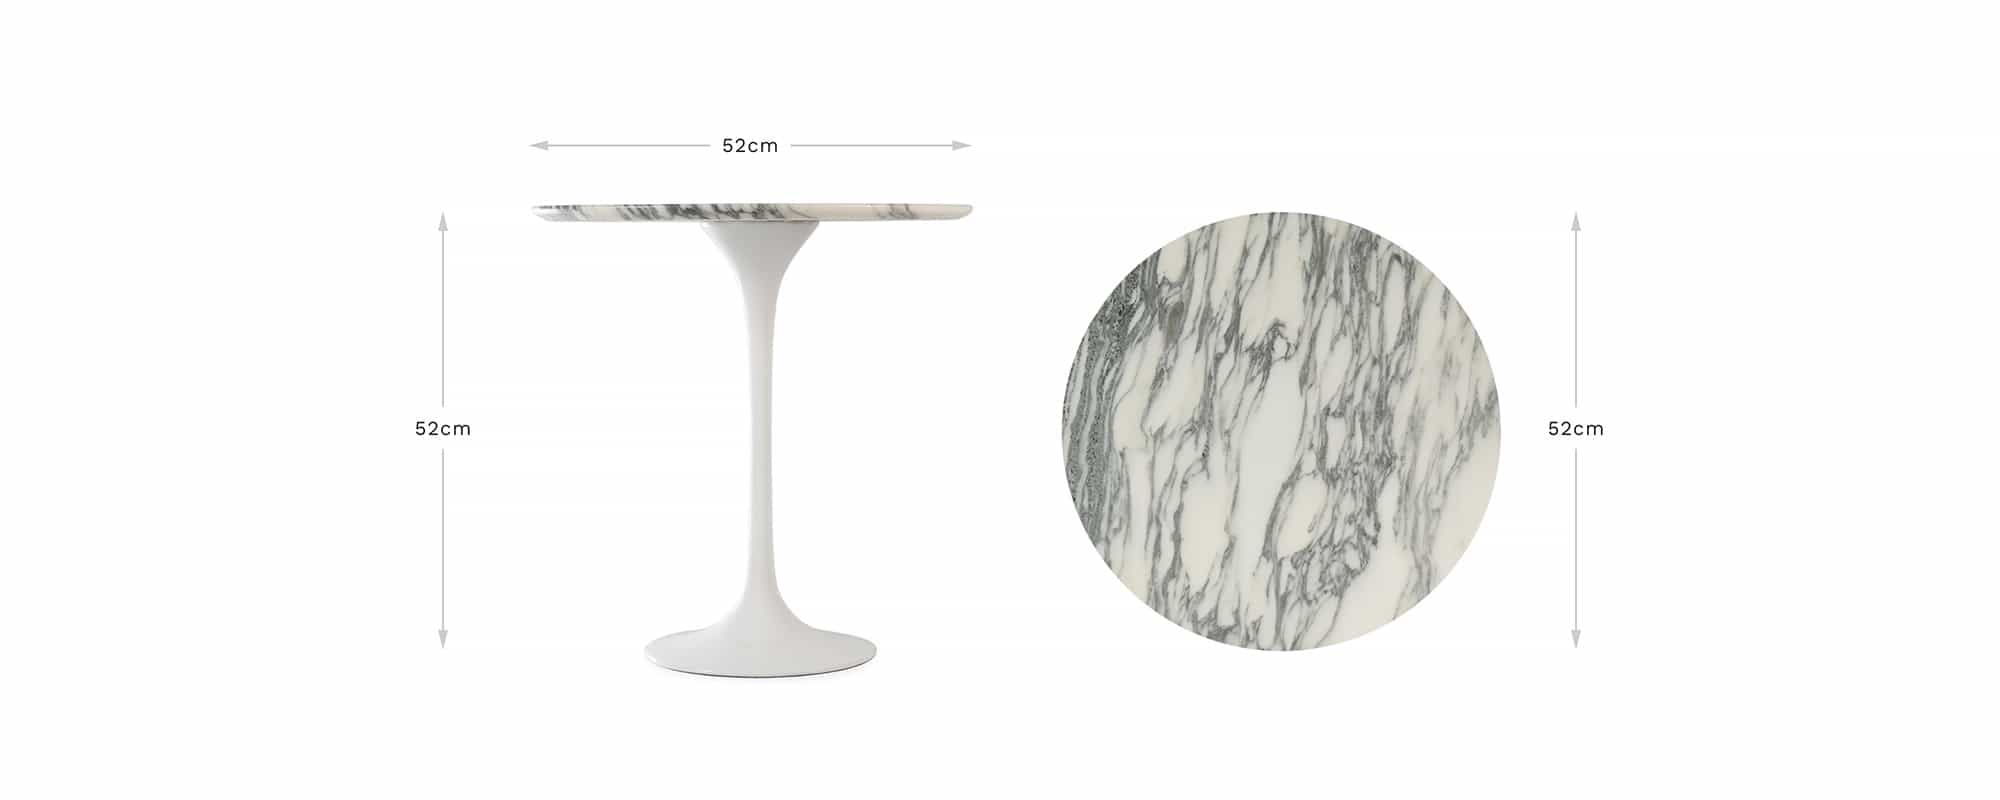 The Tulip Side Table in Arabescato Marble is used in this banner image to show readers the full dimensions of height and circumference of the product